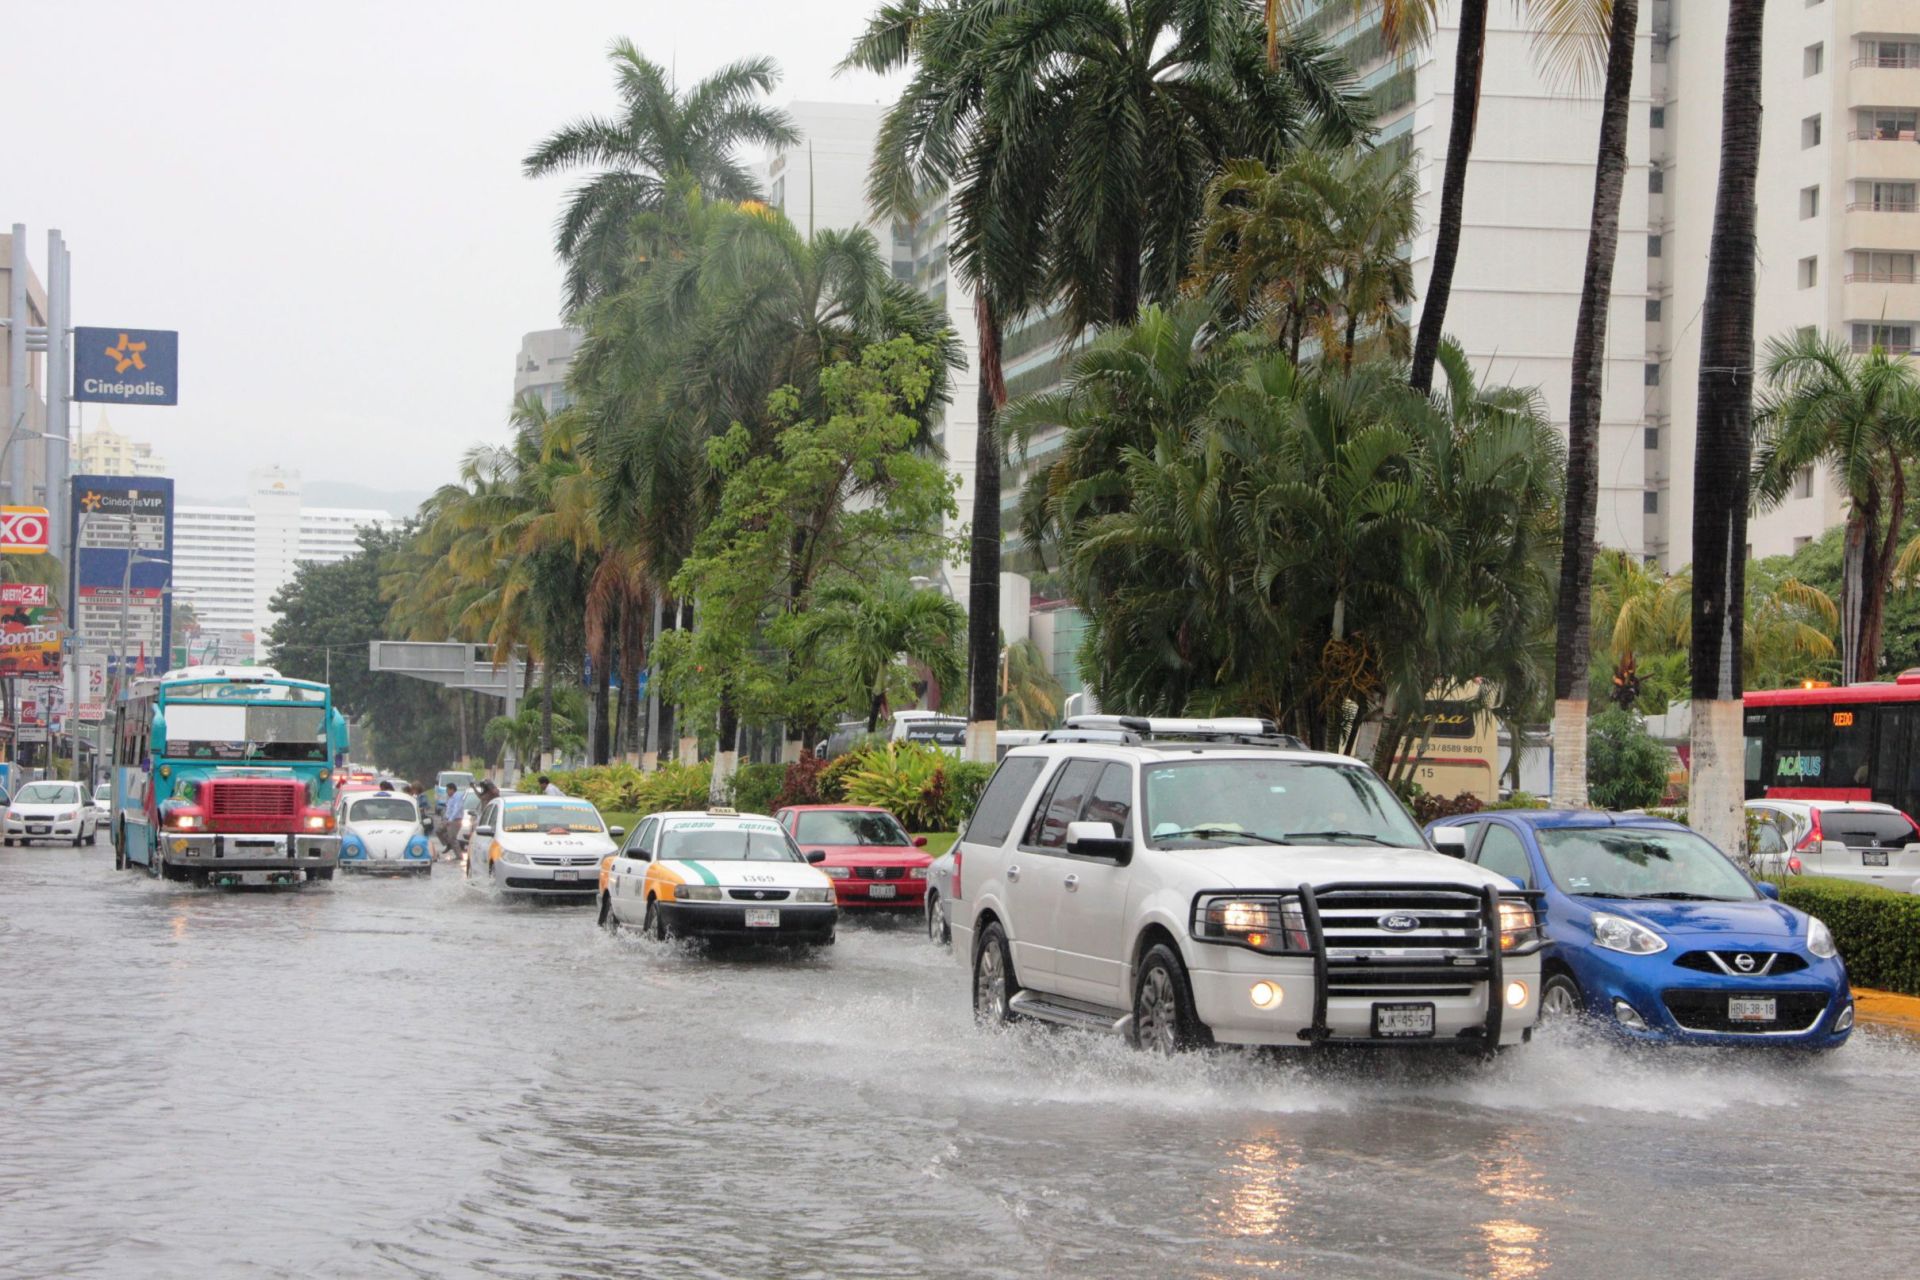 epa05460678 A general view shows vehicles transiting at a flooded street due to heavy rains left by Tropical Storm Earl's passage in Acapulco, Mexico, 06 August. Heavy rains spawned by Tropical Storm Earl have left six people dead in the Mexican Gulf coast state of Veracruz, authorities there said on 06 August 2016.  EPA/MARIA MEZA